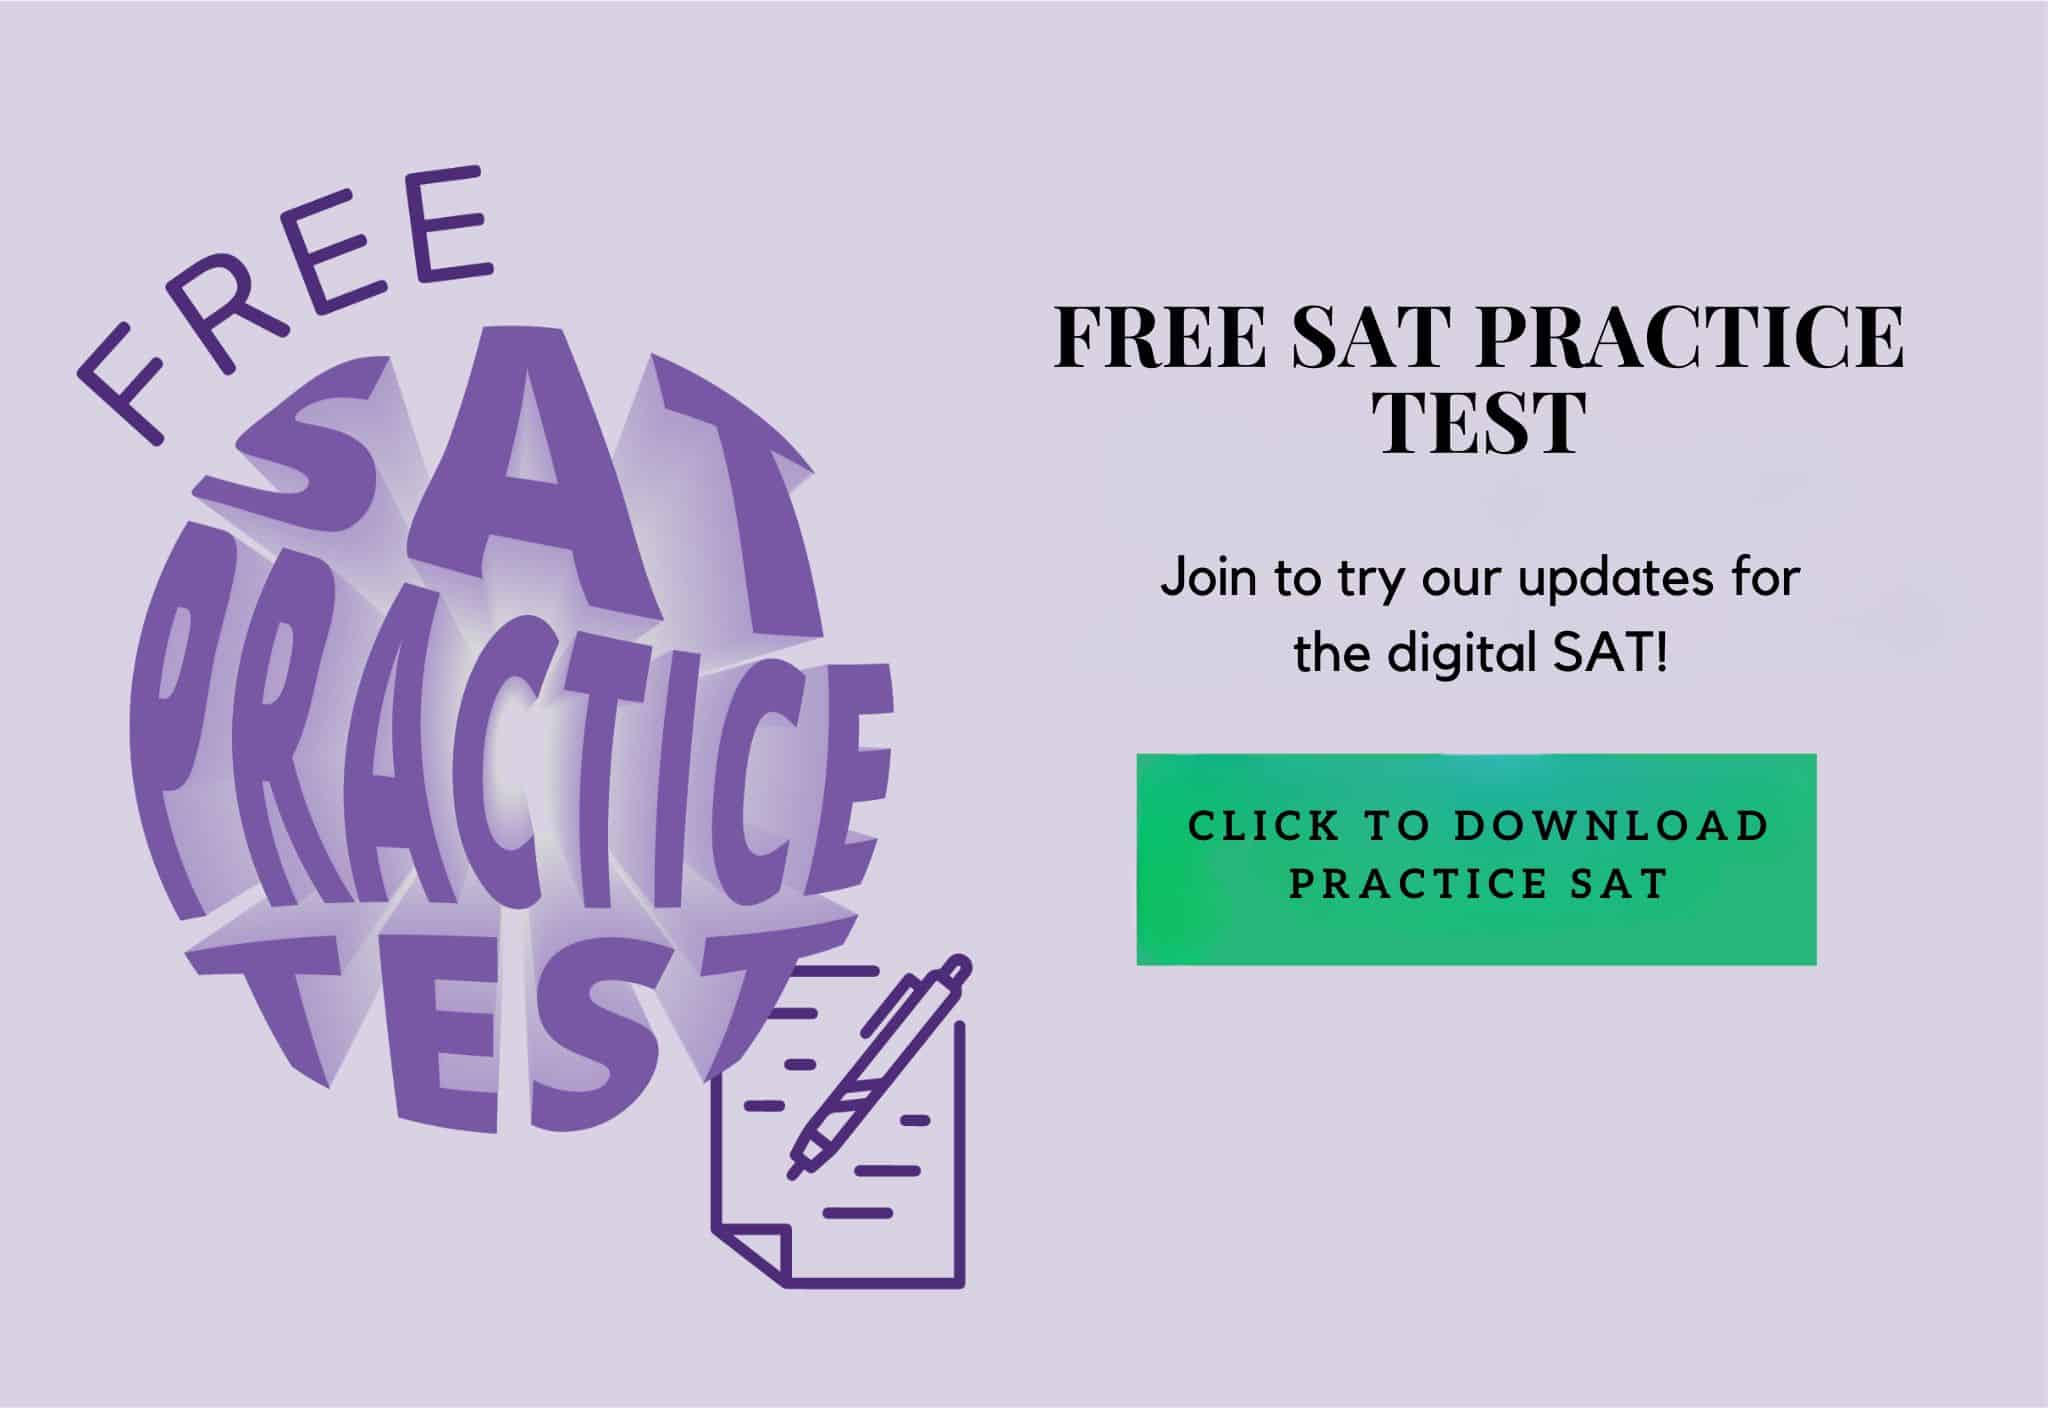 Here's a free practice test--join to prep for digtial.